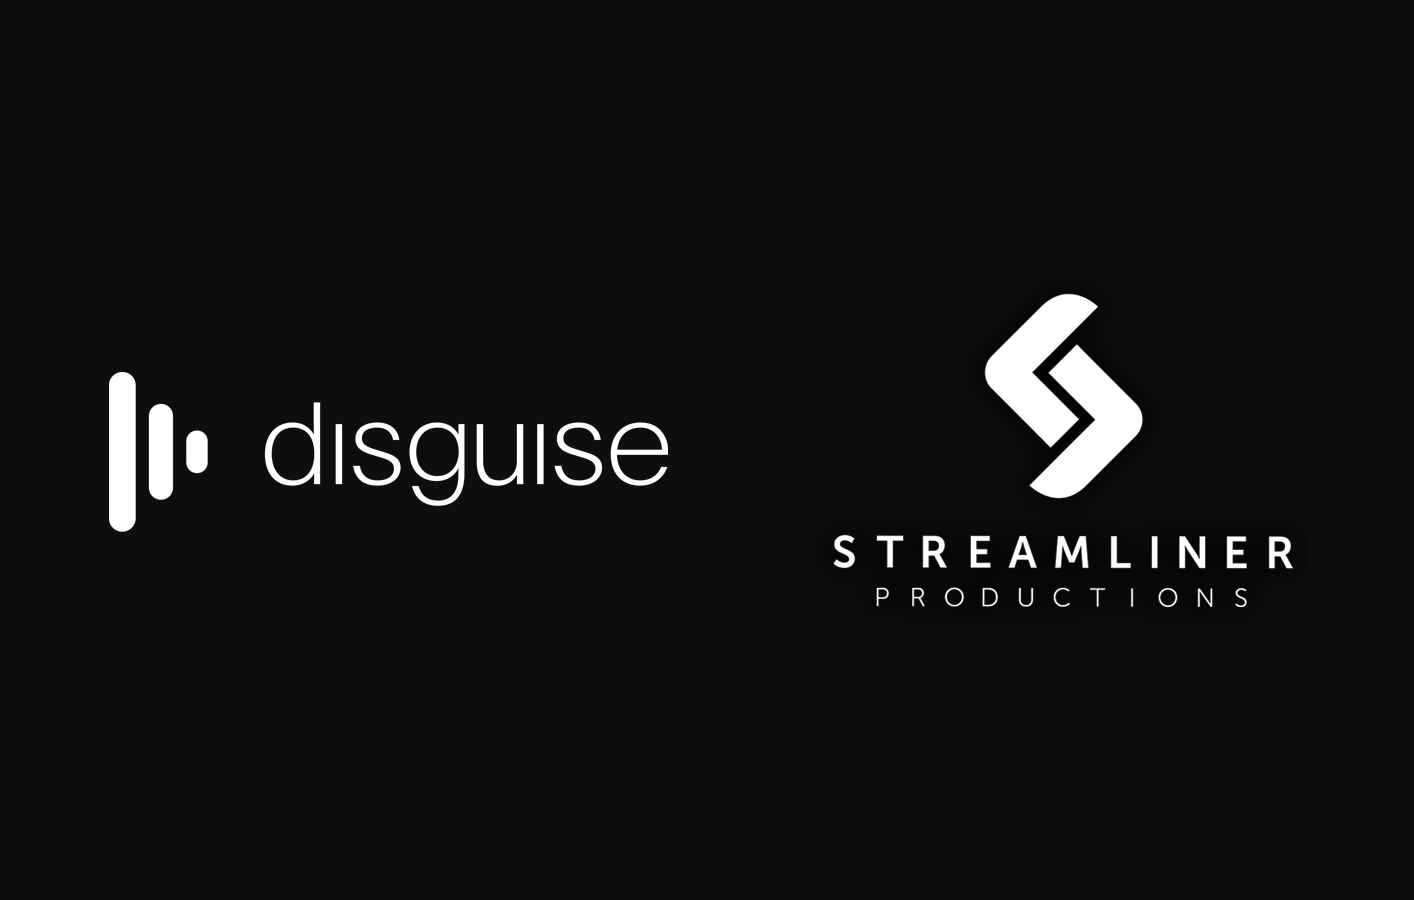 disguise extends global reach with first New Zealand-based xR partner, Streamliner Productions